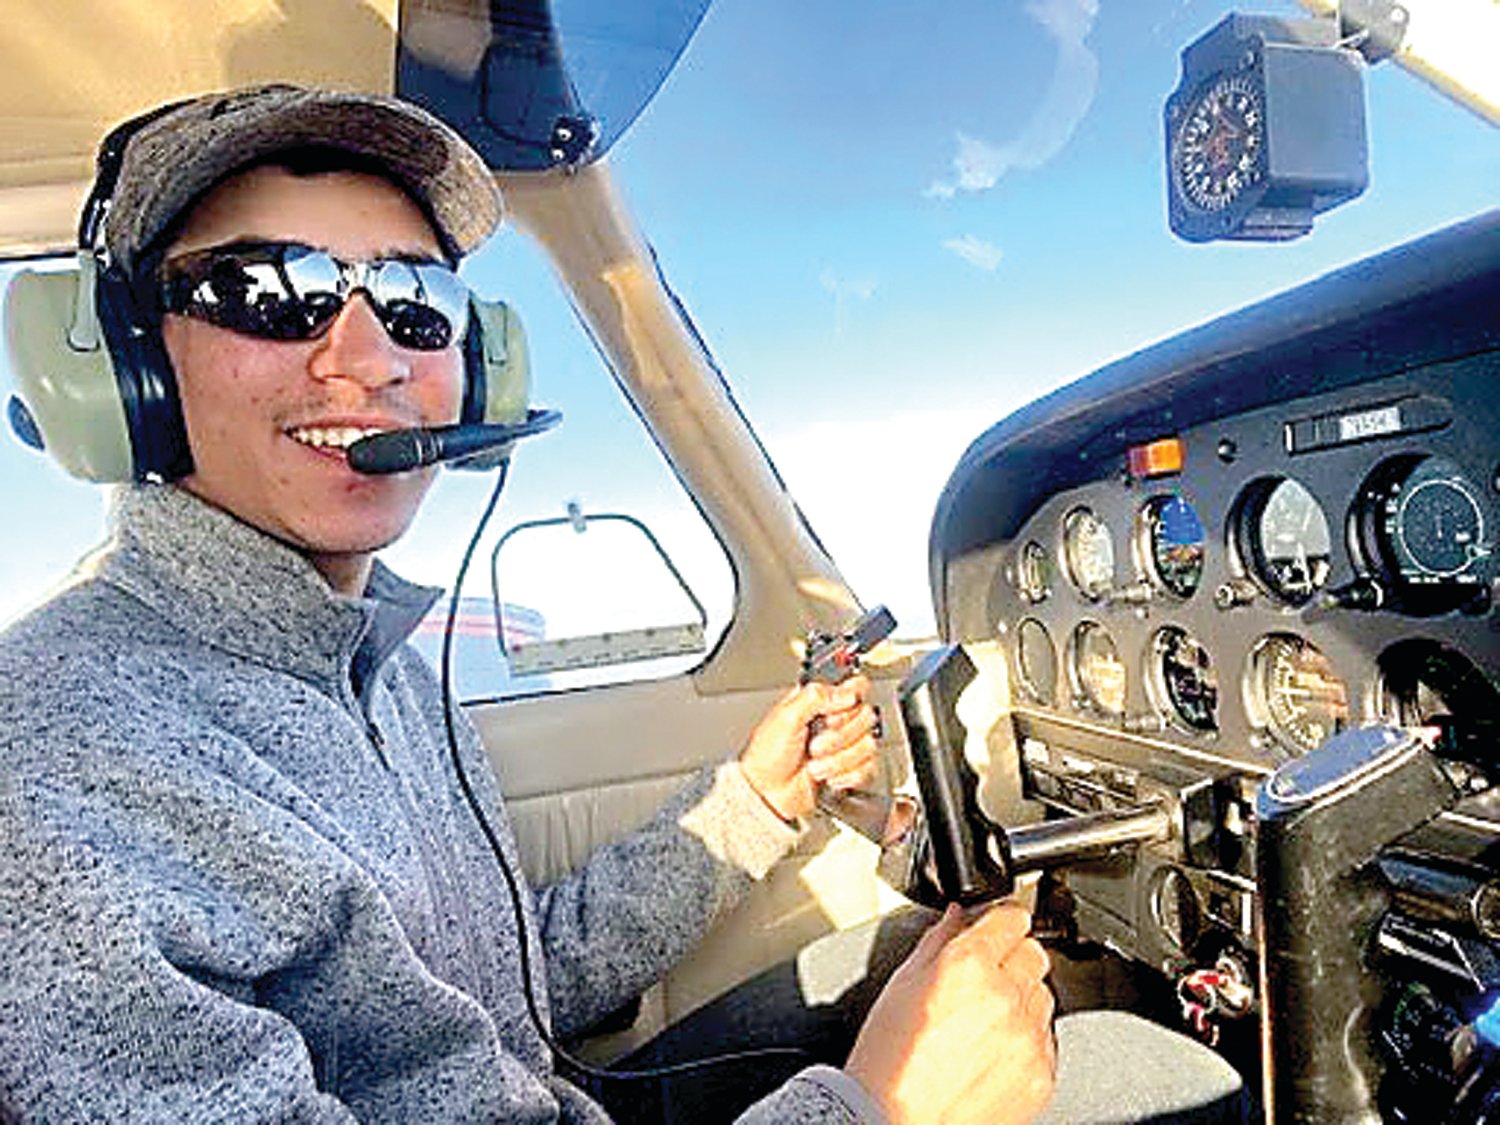 Avery Stout, an 18-year-old Quakertown Christian School senior, has his sights set on flying as a missionary bush pilot.